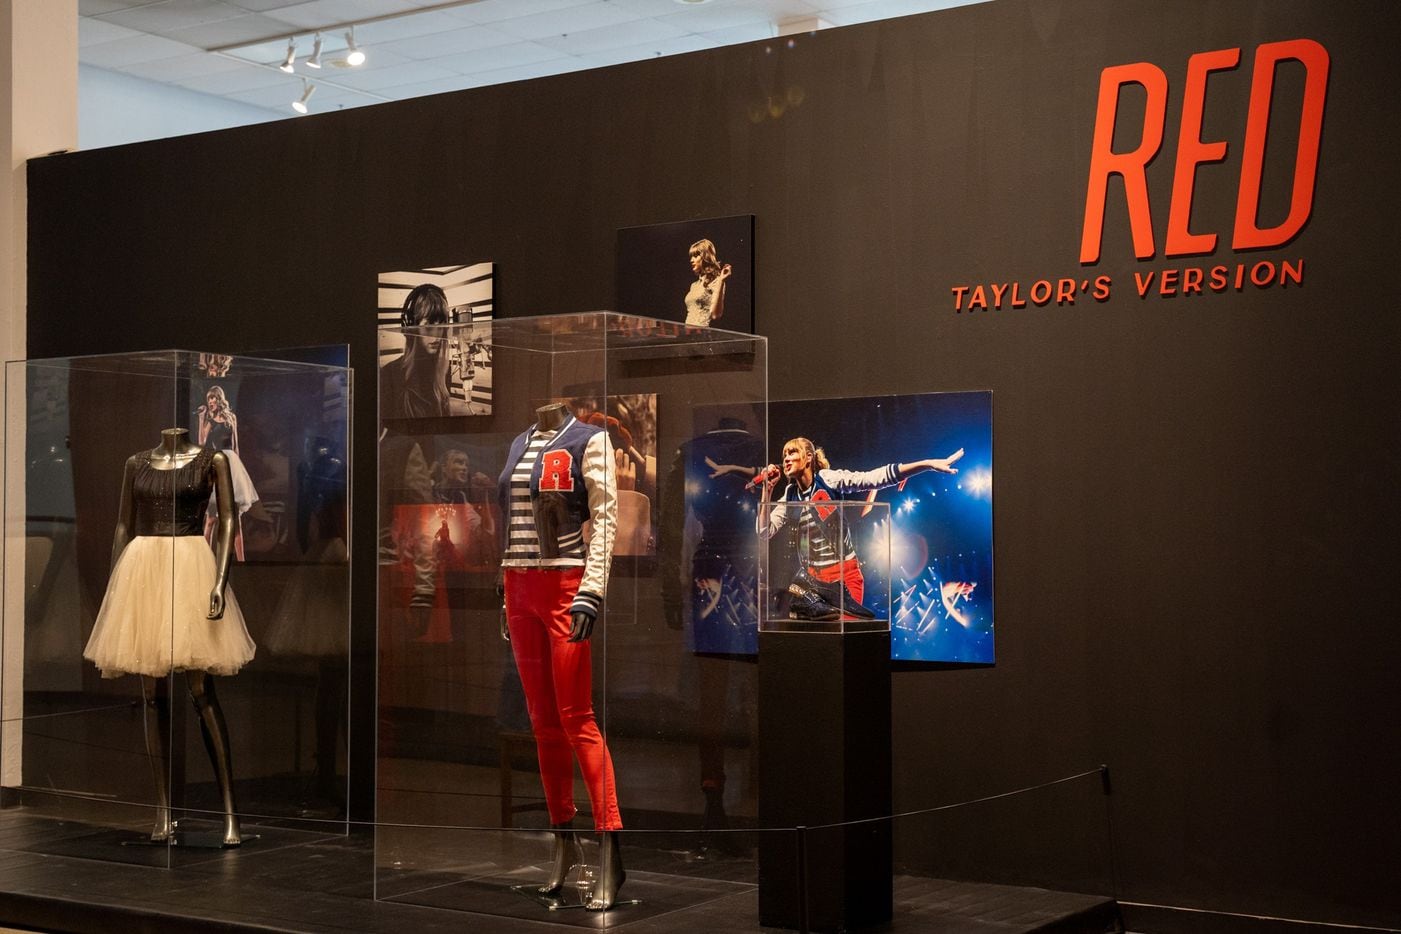 Outfits from Taylor Swift's "Red" tour are on display at the Arlington Museum of Art's...